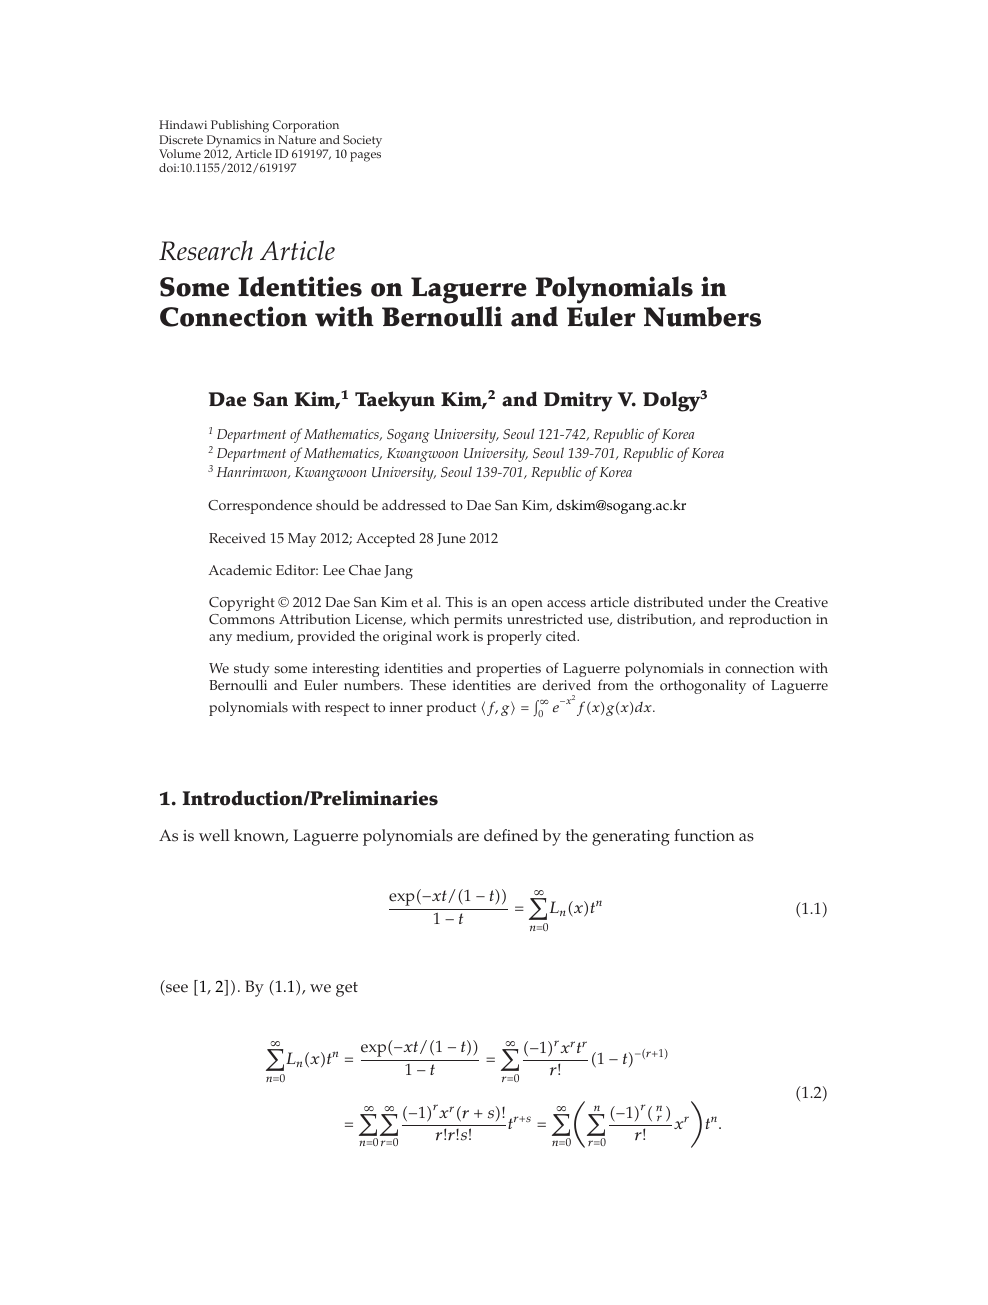 Some Identities On Laguerre Polynomials In Connection With Bernoulli And Euler Numbers Topic Of Research Paper In Mathematics Download Scholarly Article Pdf And Read For Free On Cyberleninka Open Science Hub